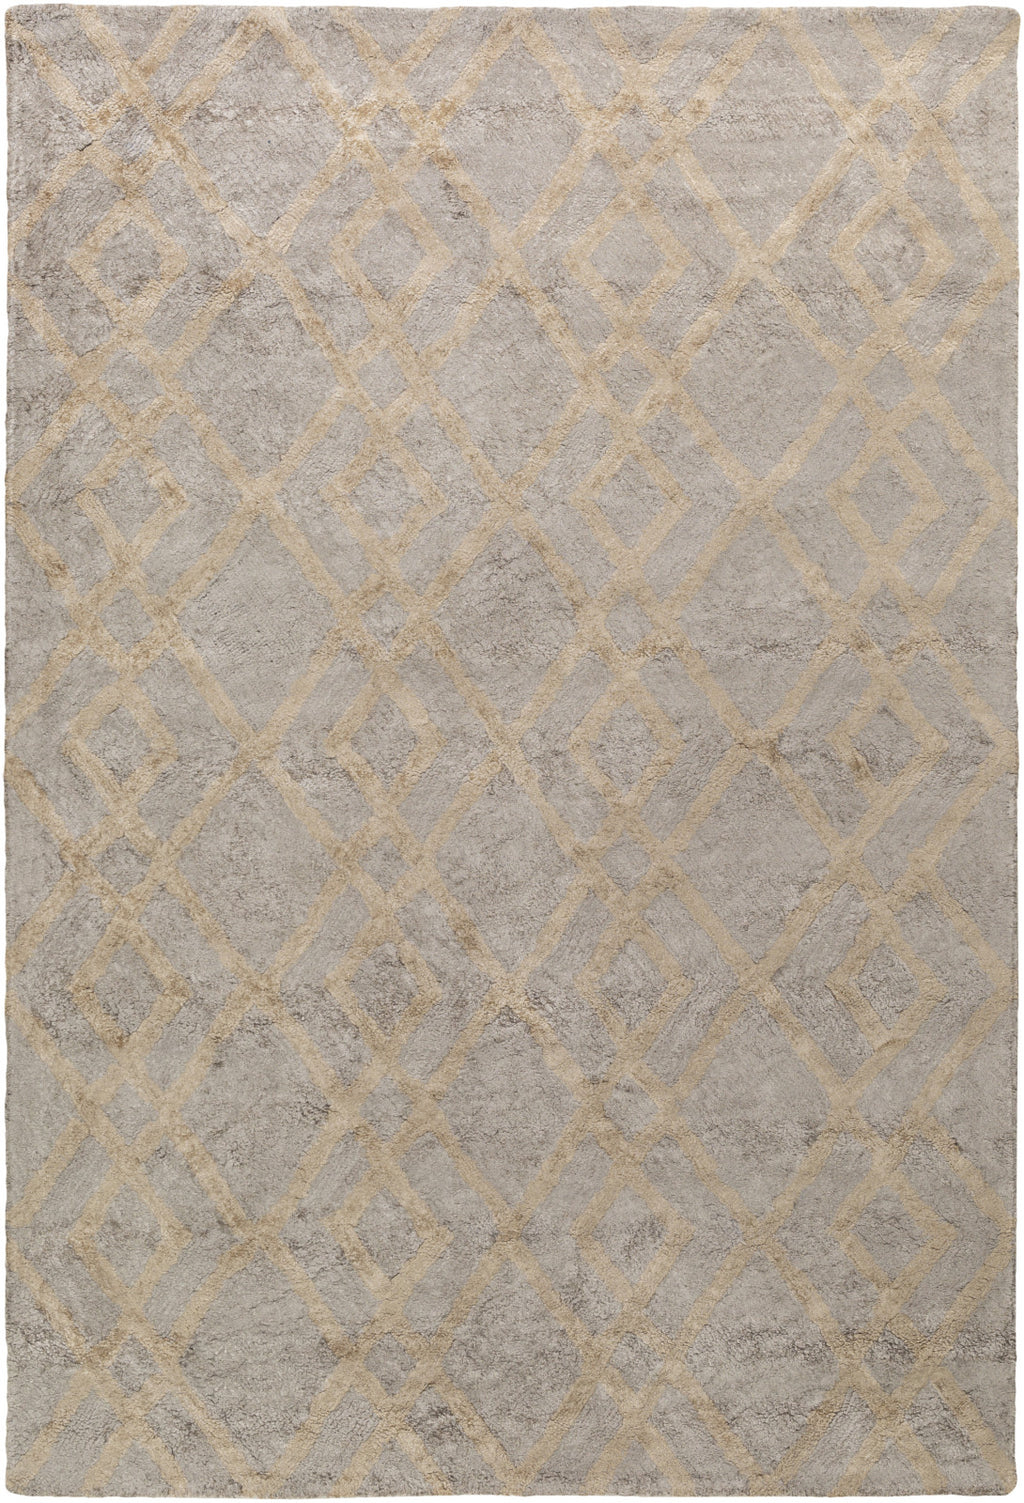 Artistic Weavers Silk Valley Lila Gray/Taupe Area Rug main image